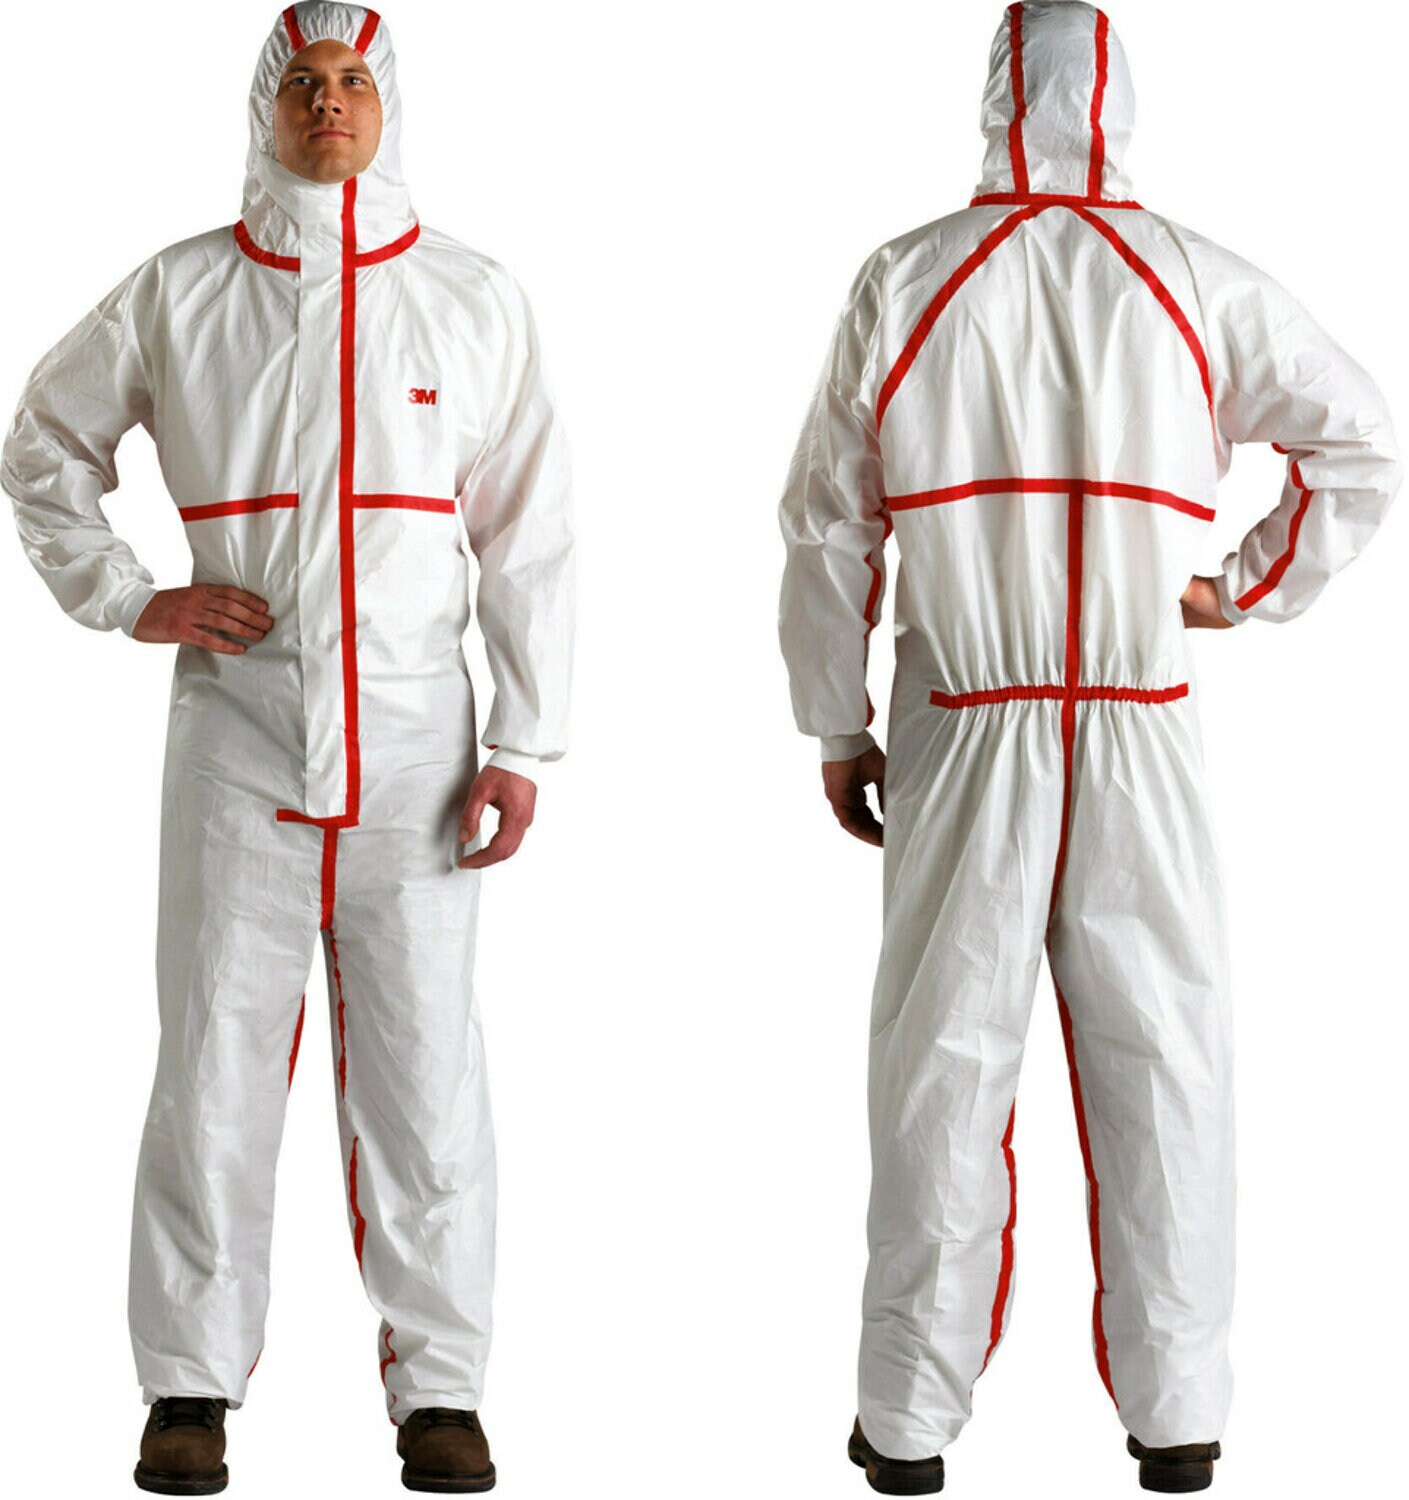 7000109049 - 3M Disposable Chemical Protective Coverall 4565-BLK-XXL, 25 EA/Case